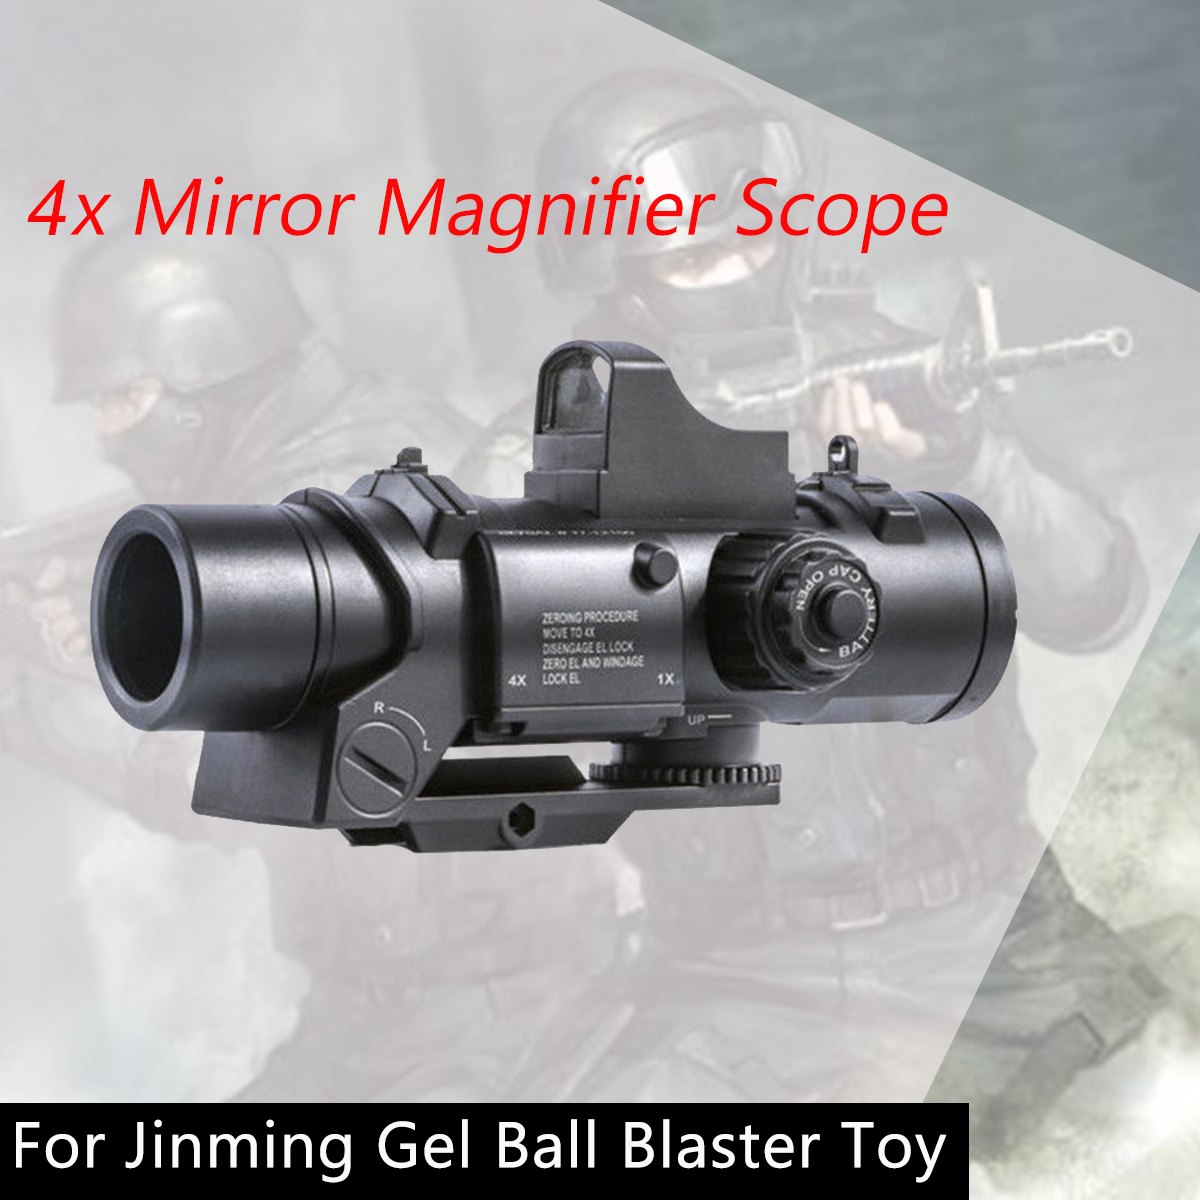 4X Mirror Magnifier Scope with Red Dot Sights For Jinming Gel Ball Water Toy 13